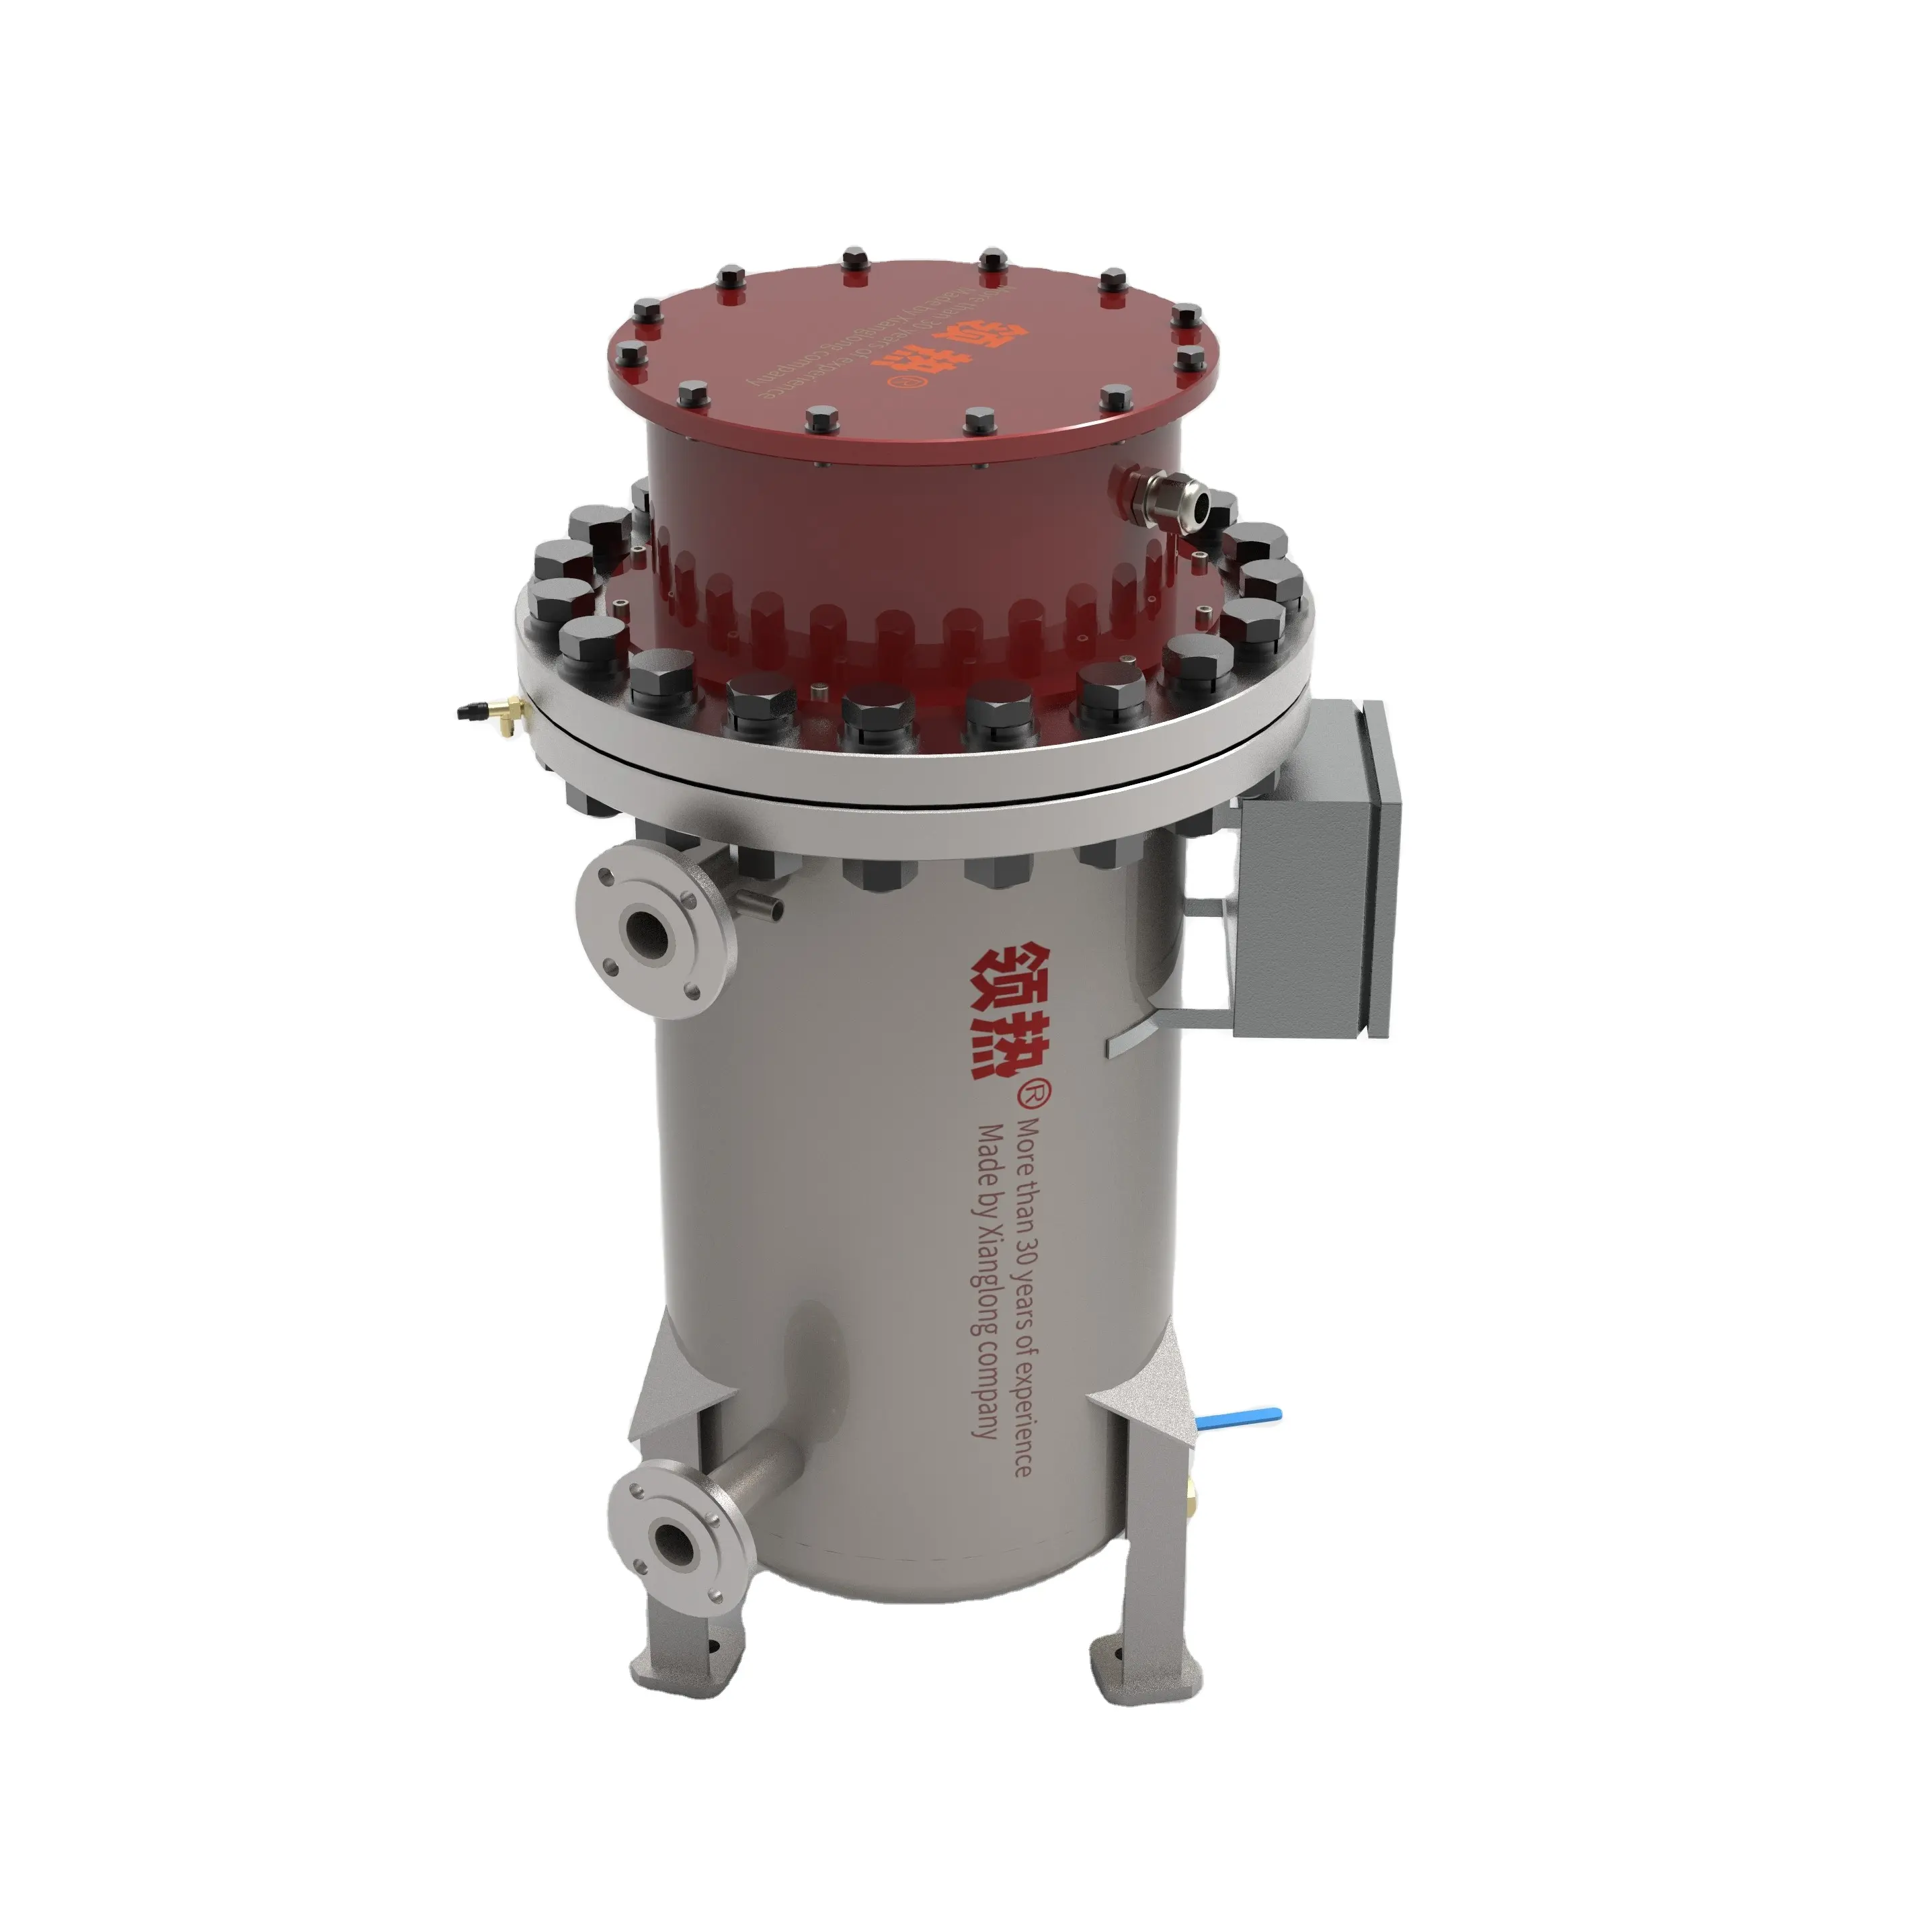 High Temperature Flange Tubular Immersion Circulation Process In-line Heater With Control Panel